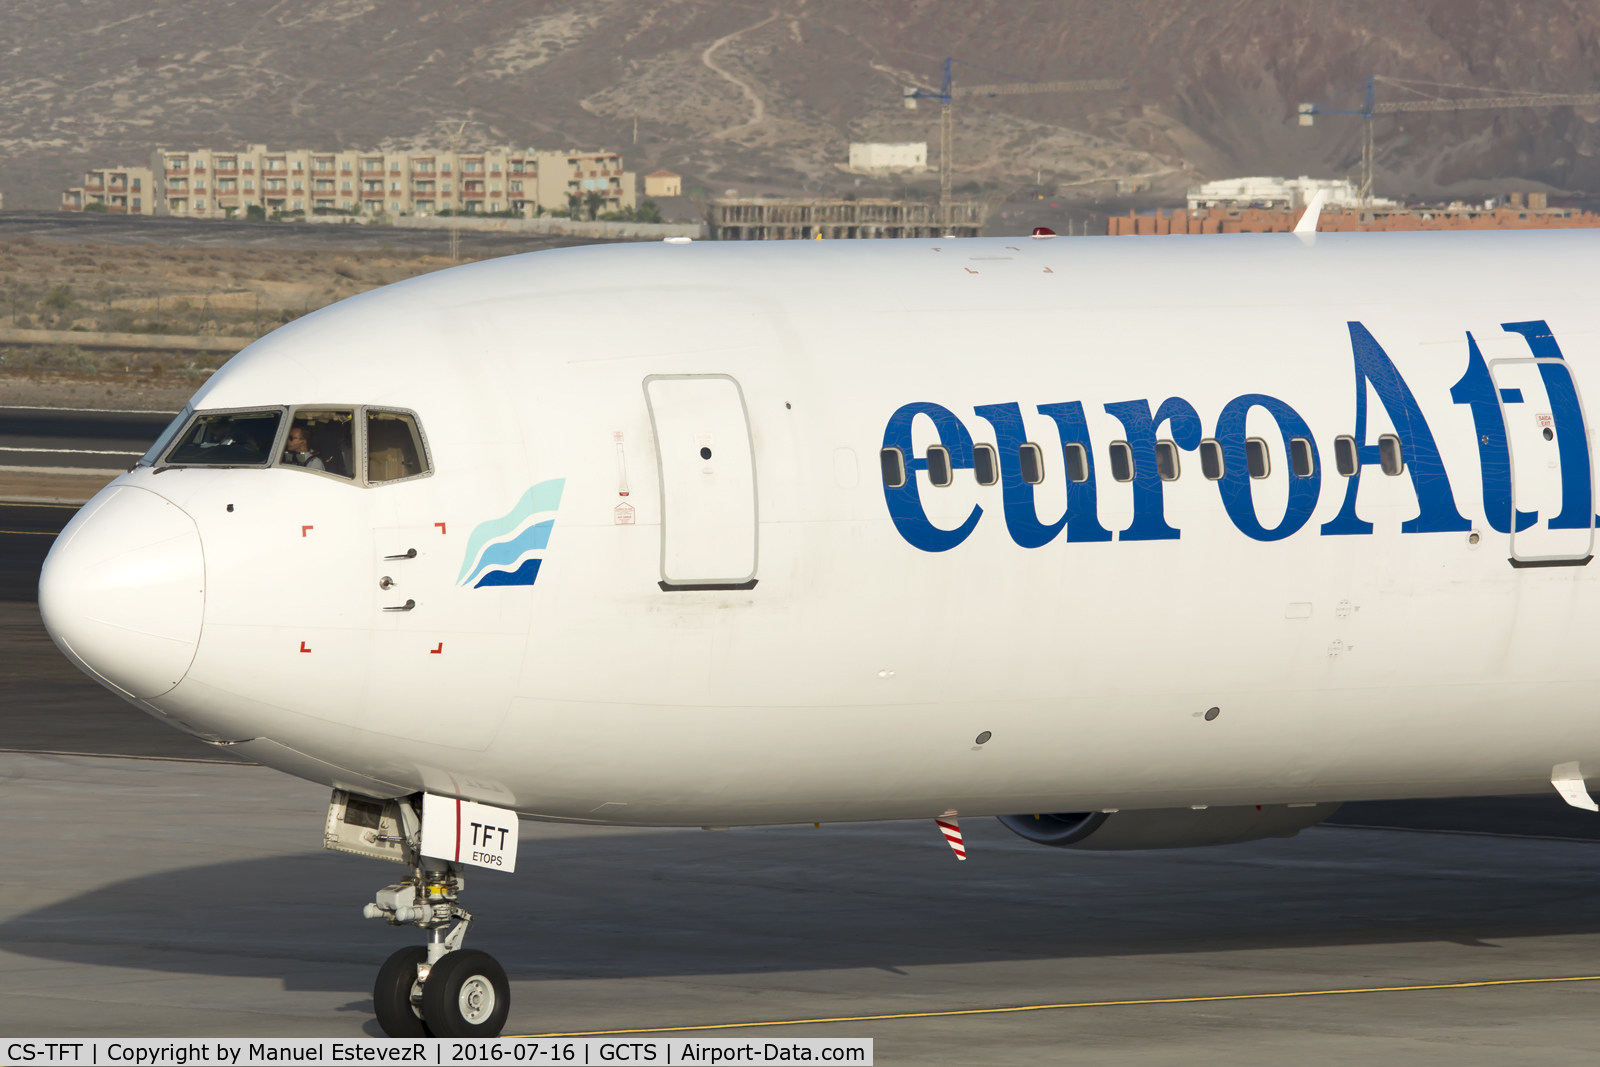 CS-TFT, 1993 Boeing 767-3Y0/ER C/N 26208, Flying to Vueling, we visited this attractive B767 in Tenerife South